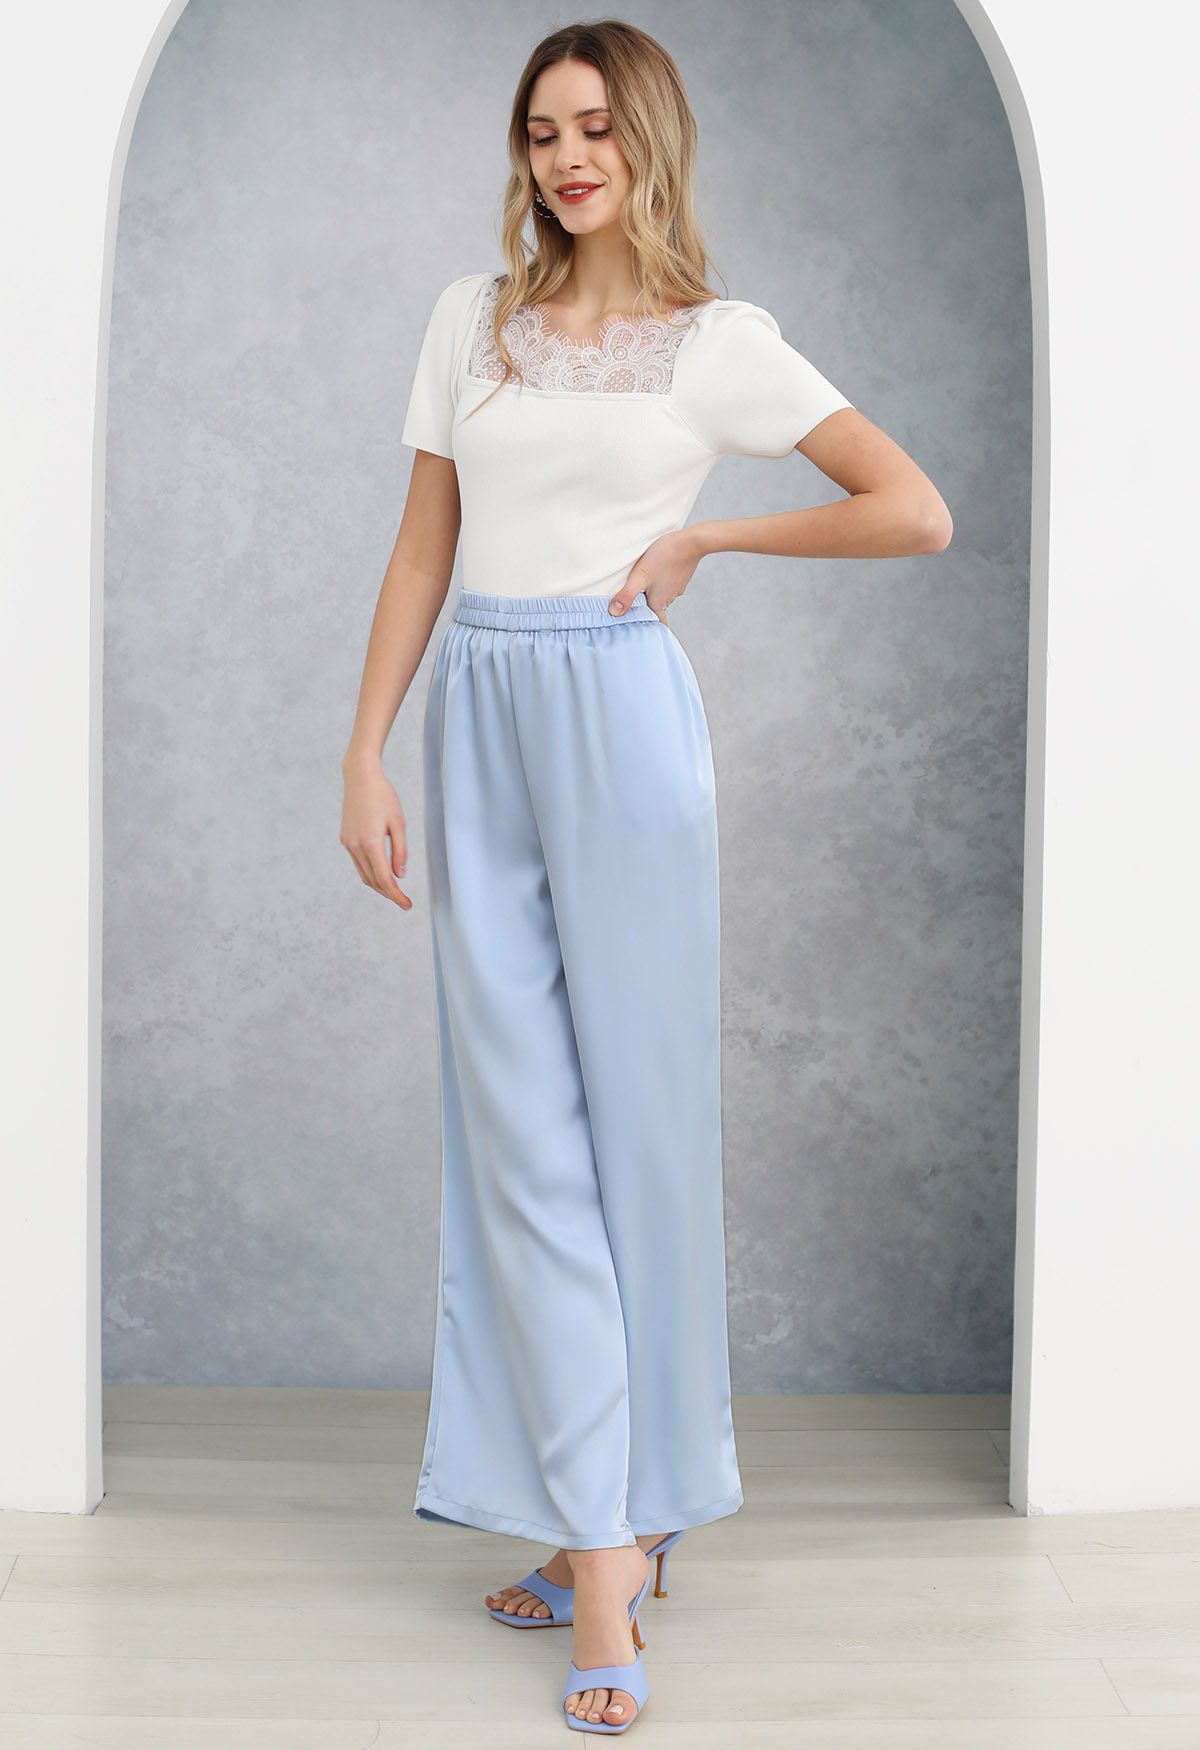 Satin Finish Pull-On Pants in Blue